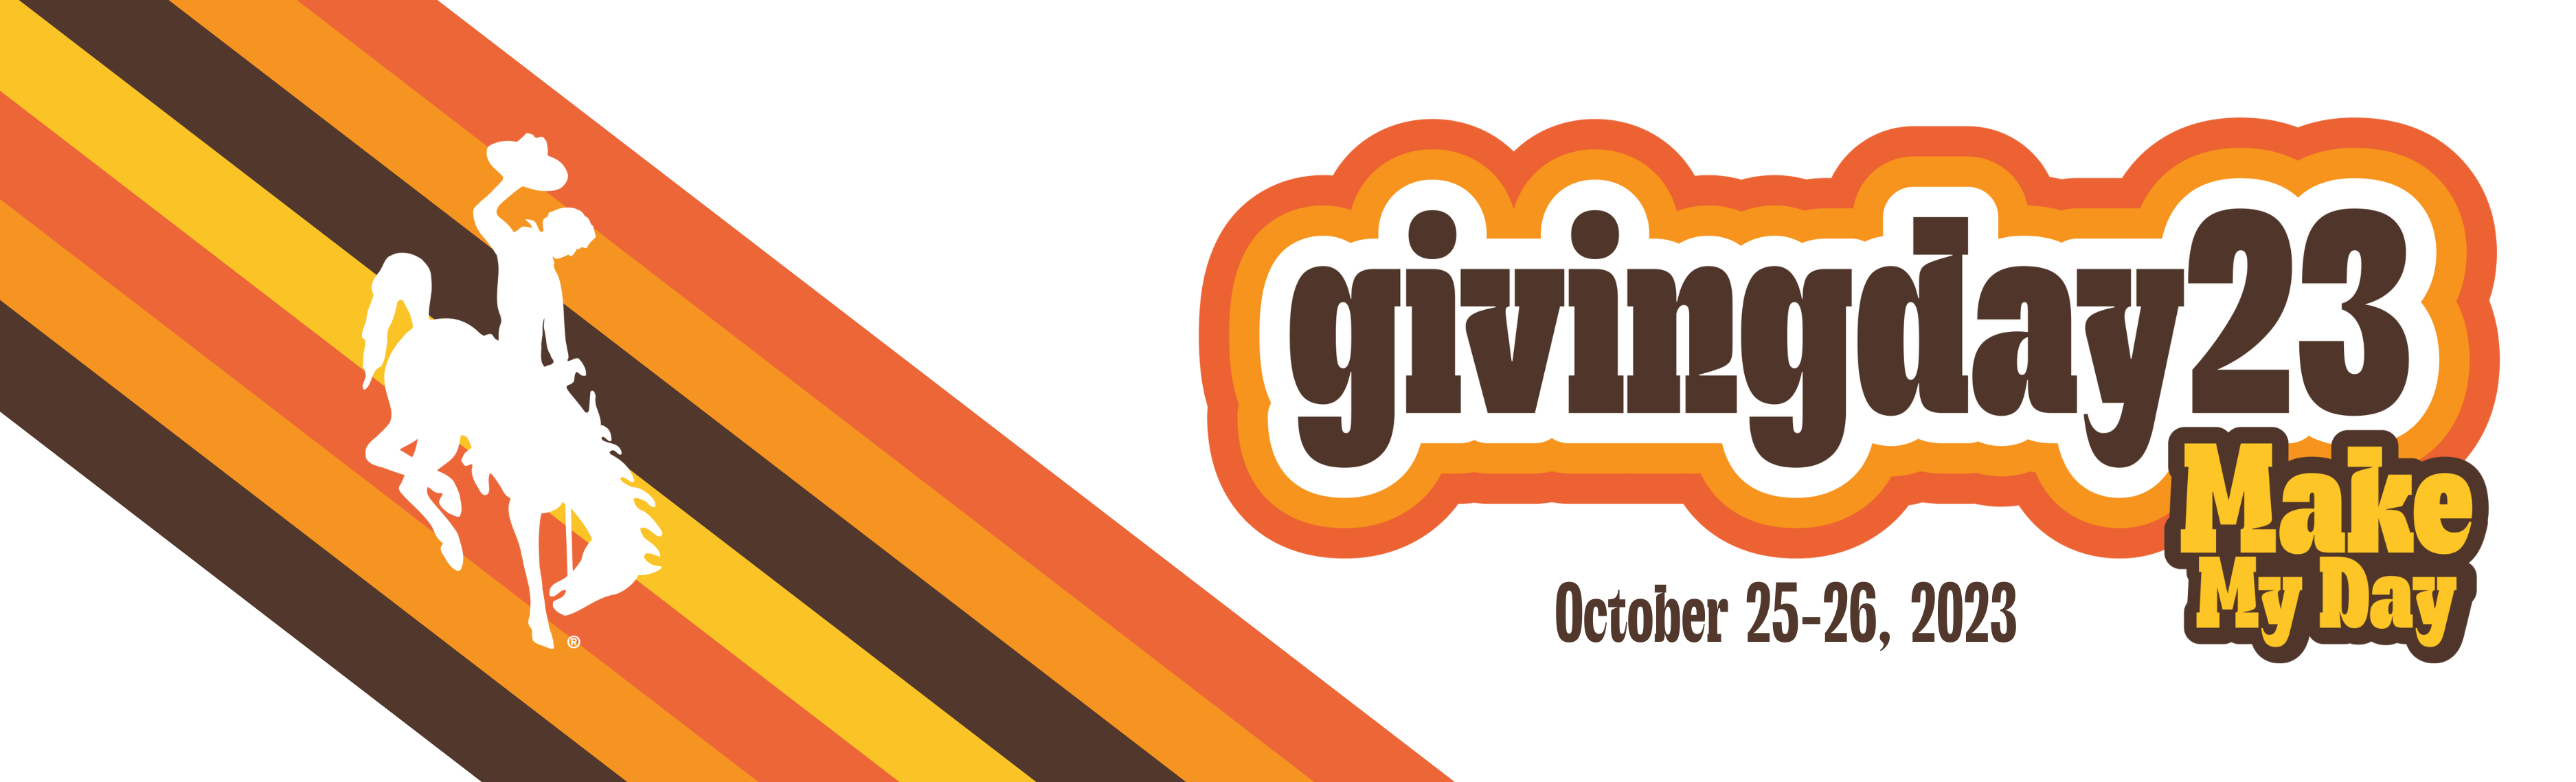 Giving Day Banner